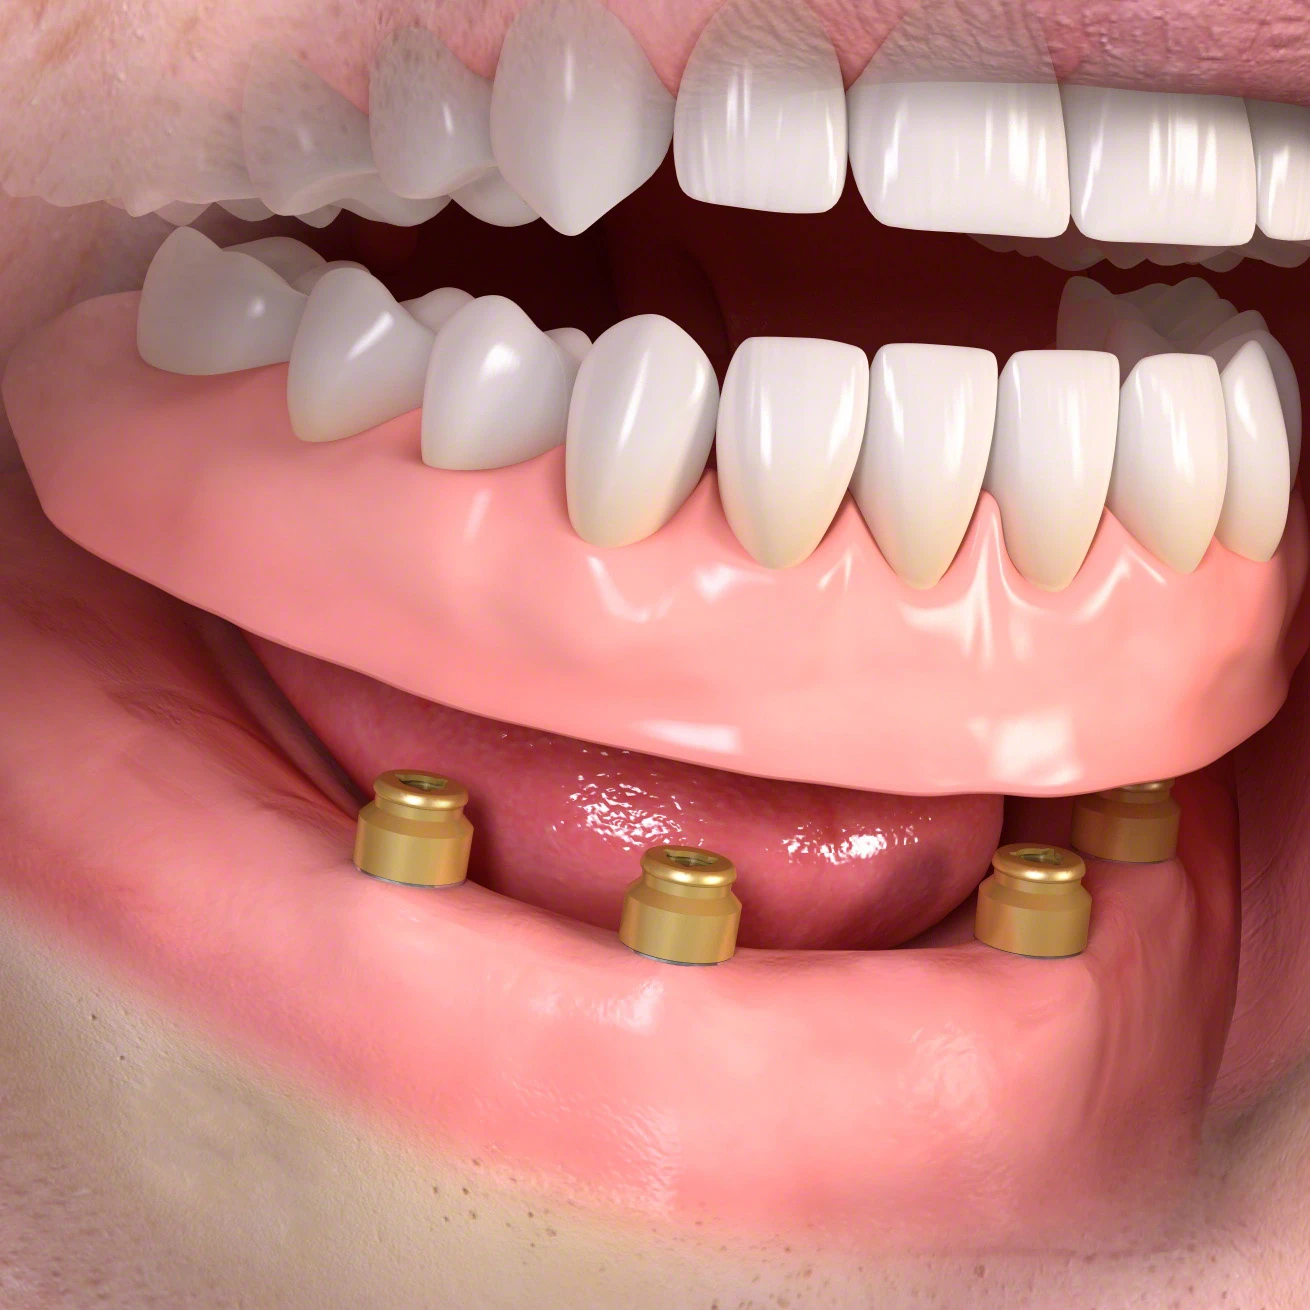 Stock image of an implant retained overdenture